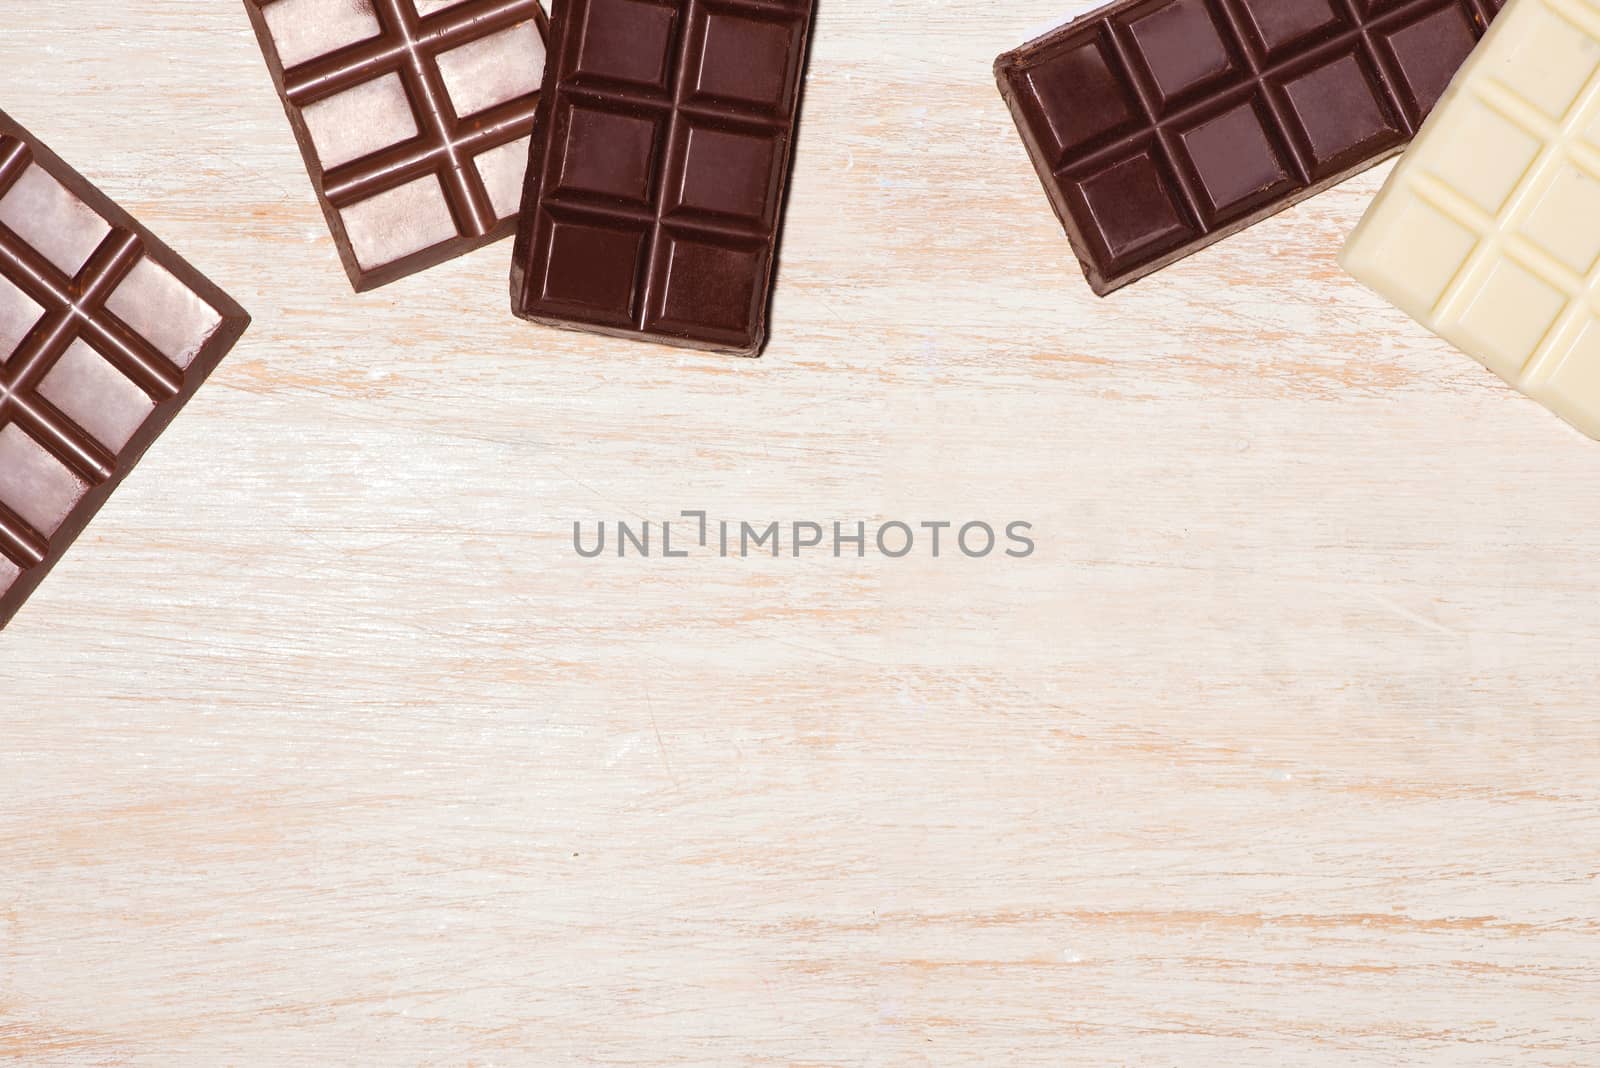 A lot of variety chocolates bar in box on white wooden background